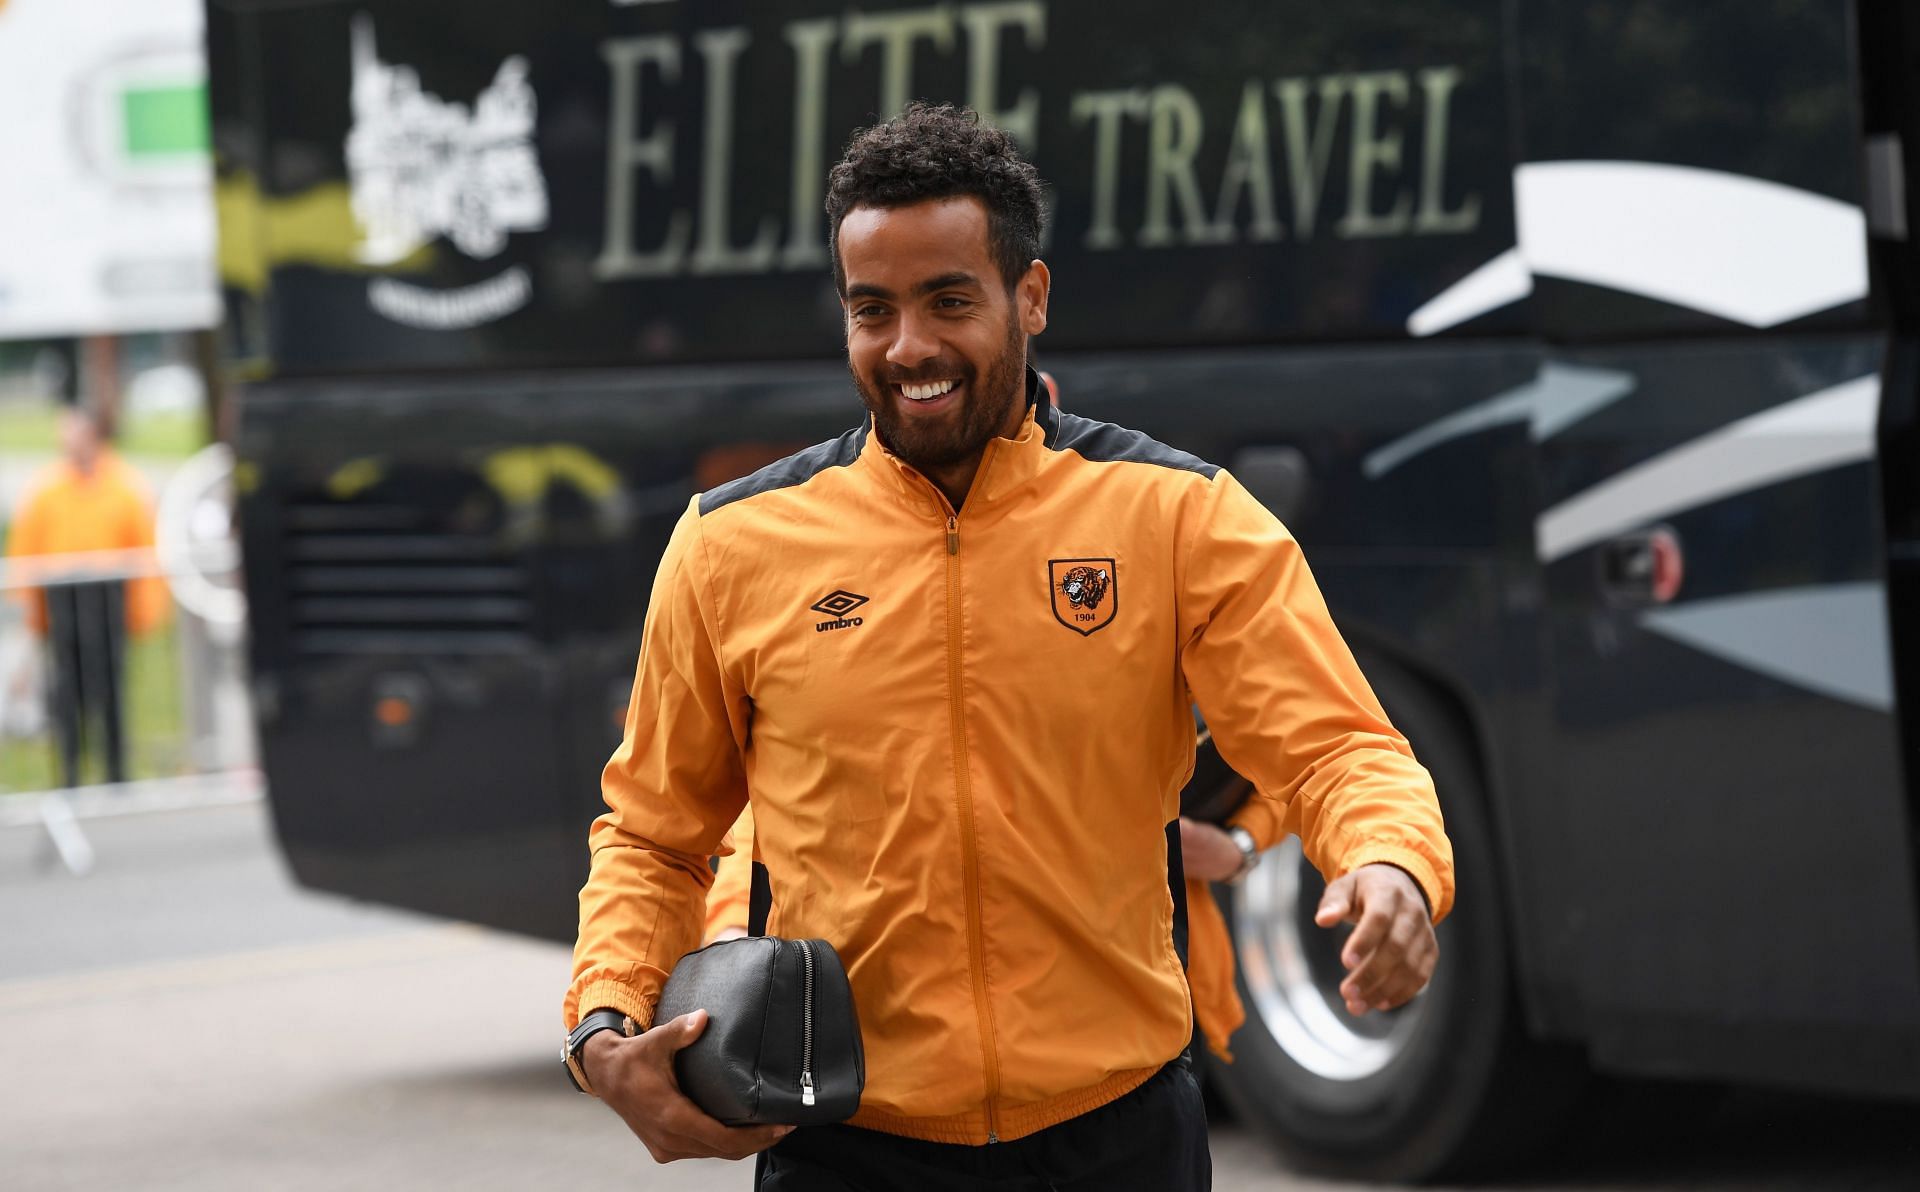 Huddlestone will be a huge miss for Hull City on Saturday